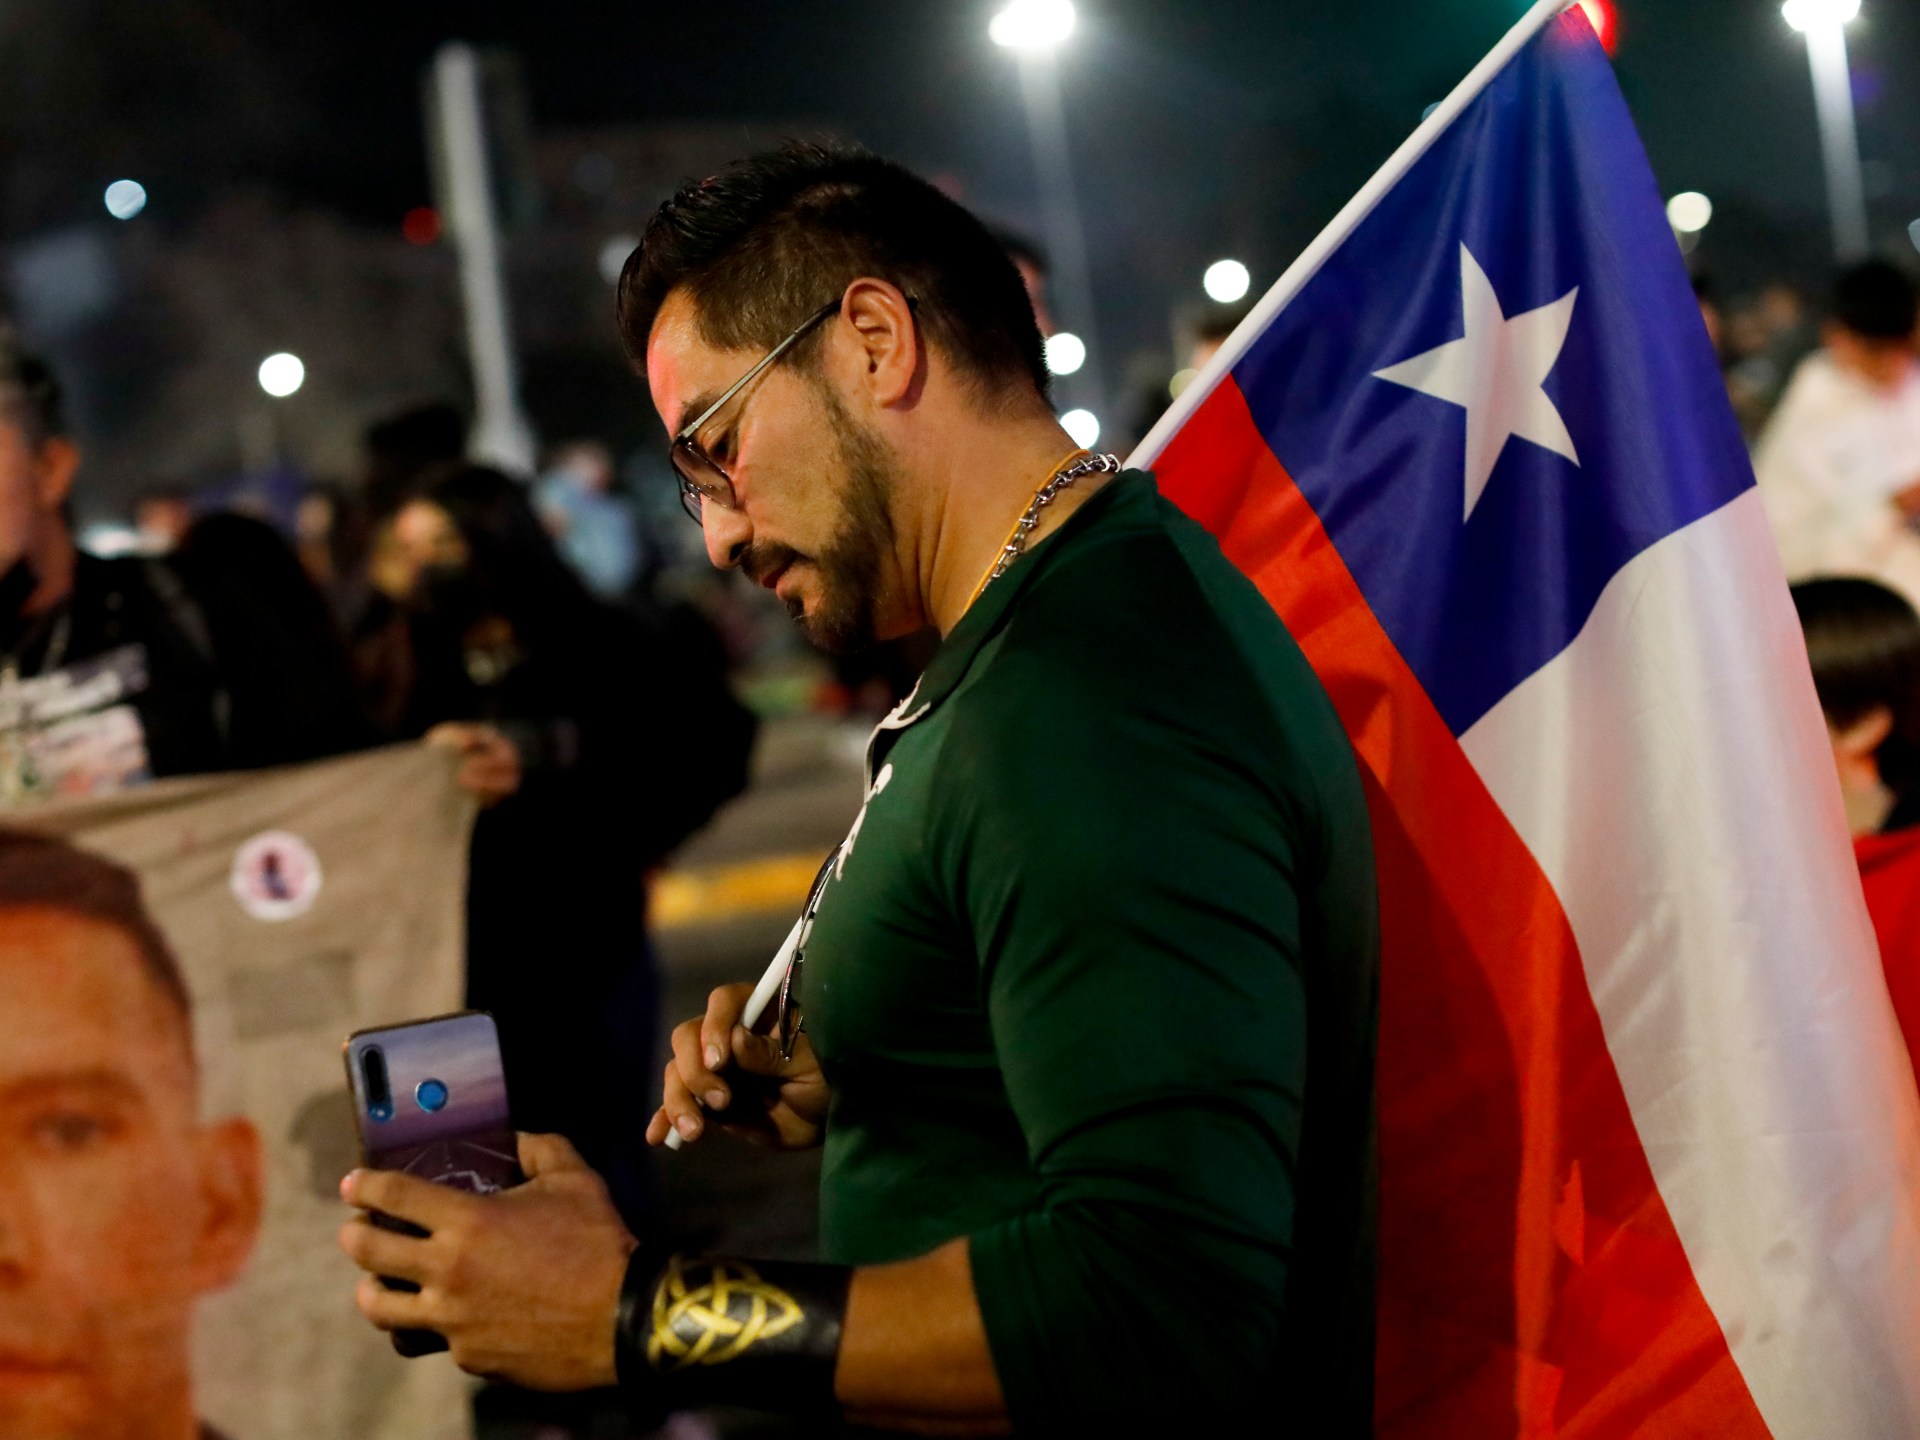 ‘Sense of abandonment’ as Chile rejects new constitution | Environment News